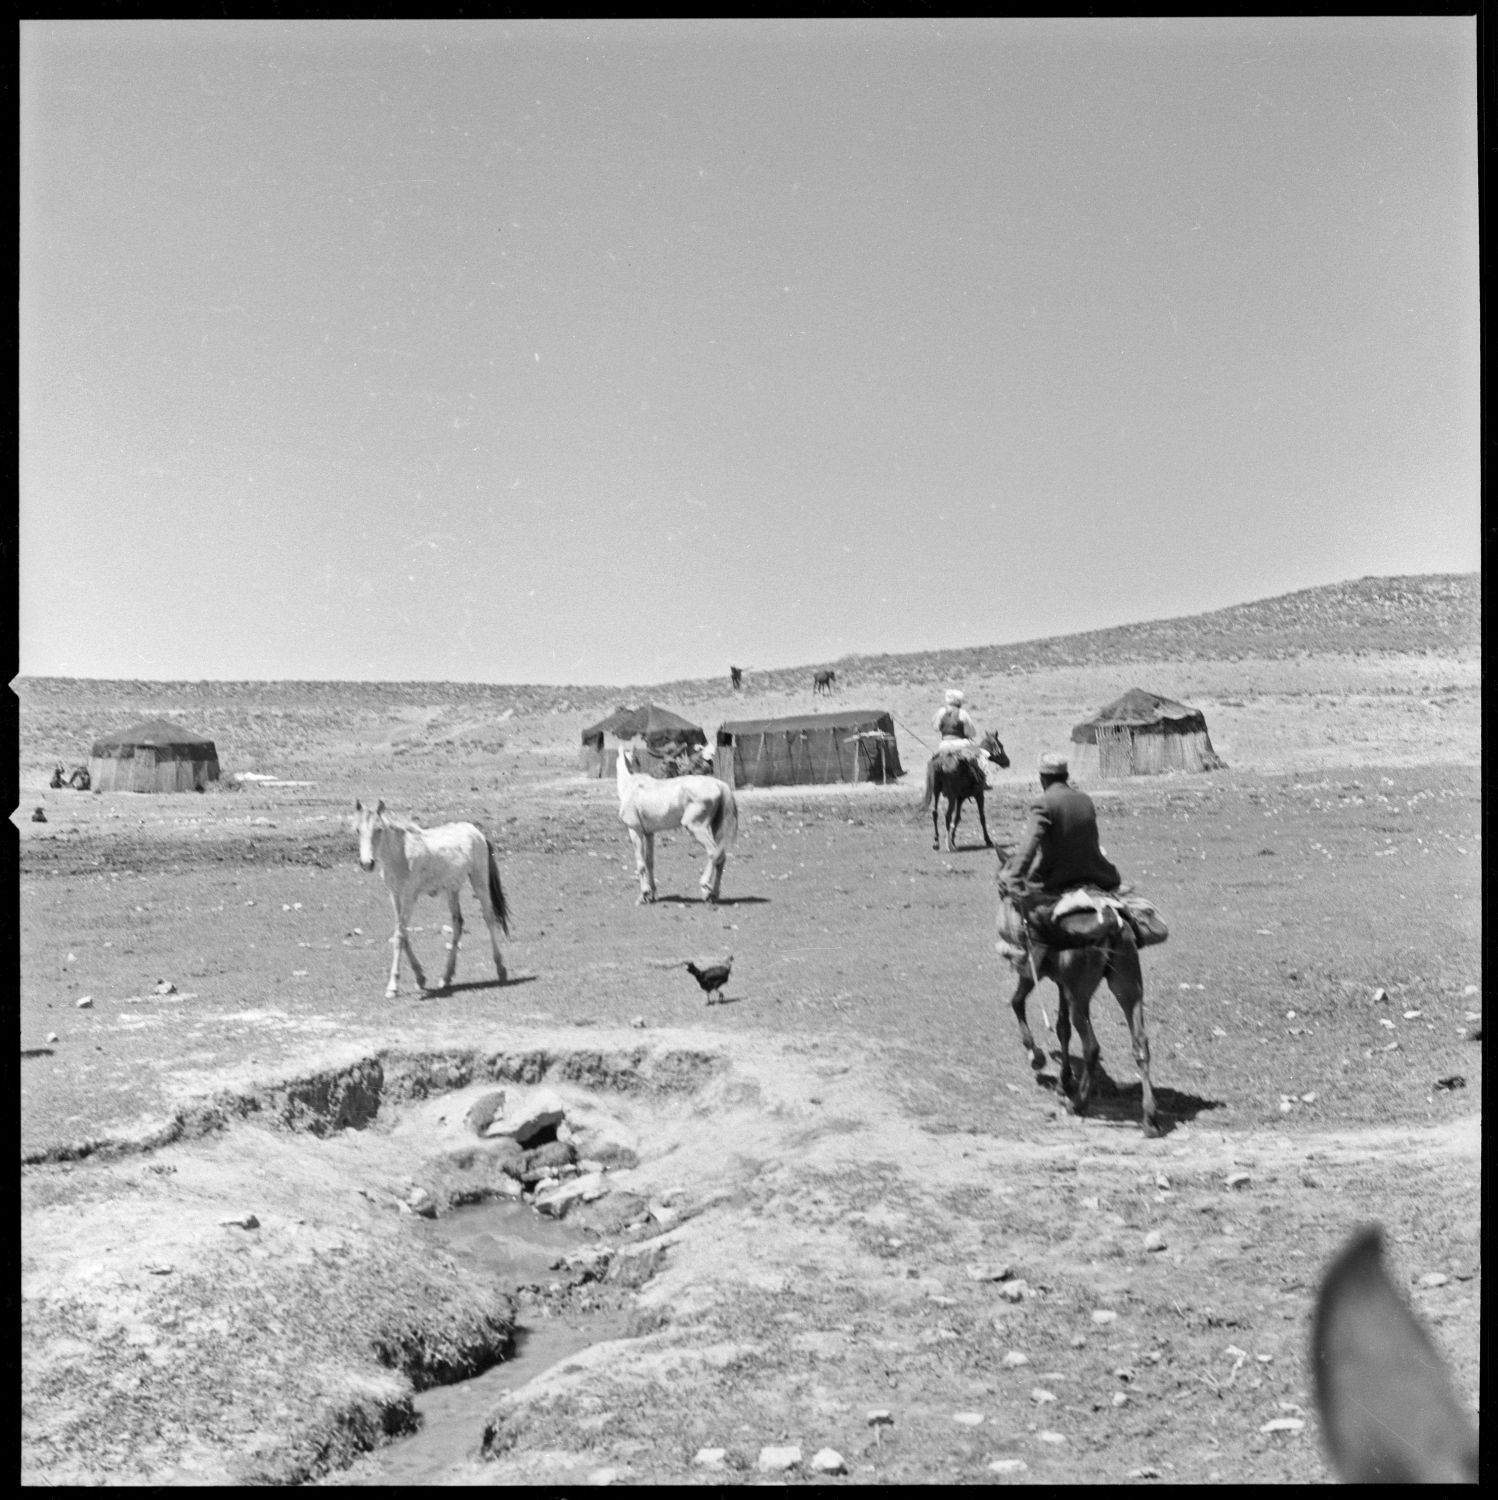 Man on horse approaches a yurt camp in the vicinity of Jam, Afghanistan.